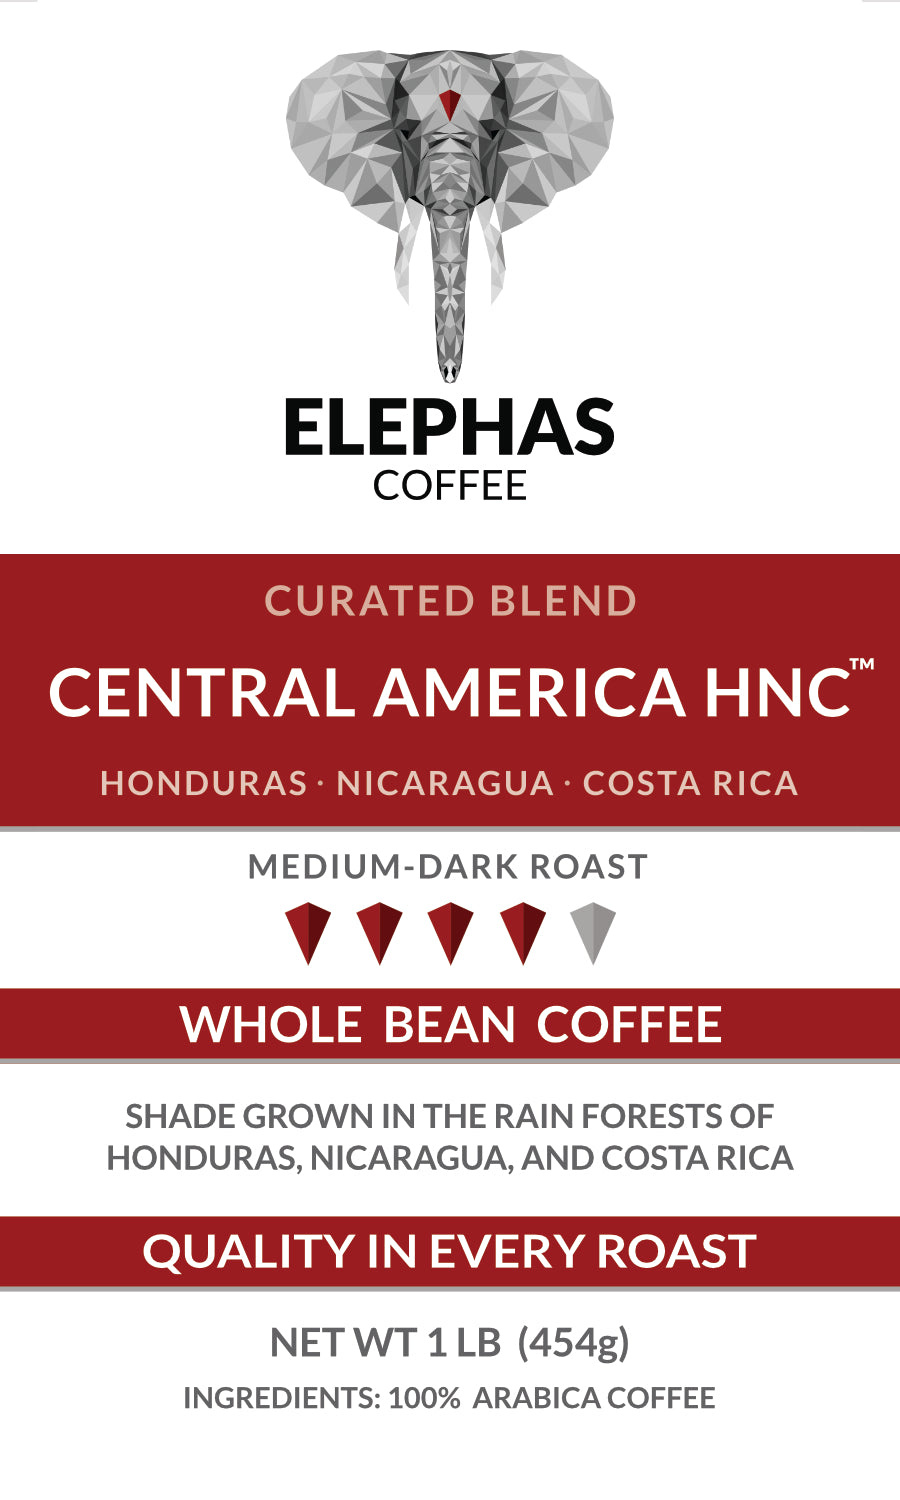 Central America HNC - Curated Coffee Blend